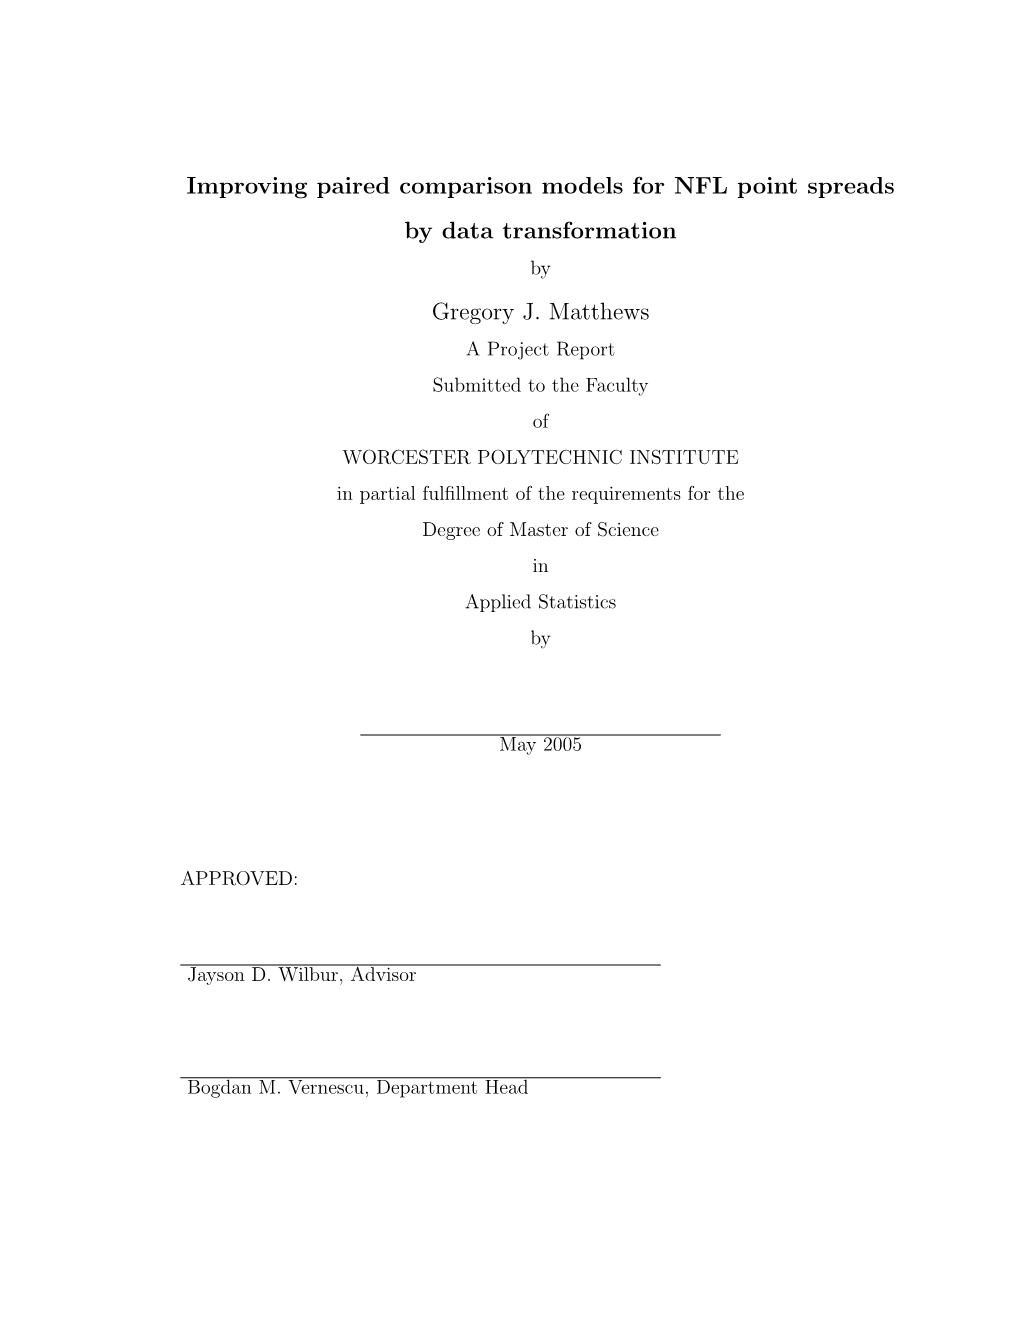 Improving Paired Comparison Models for NFL Point Spreads by Data Transformation by Gregory J